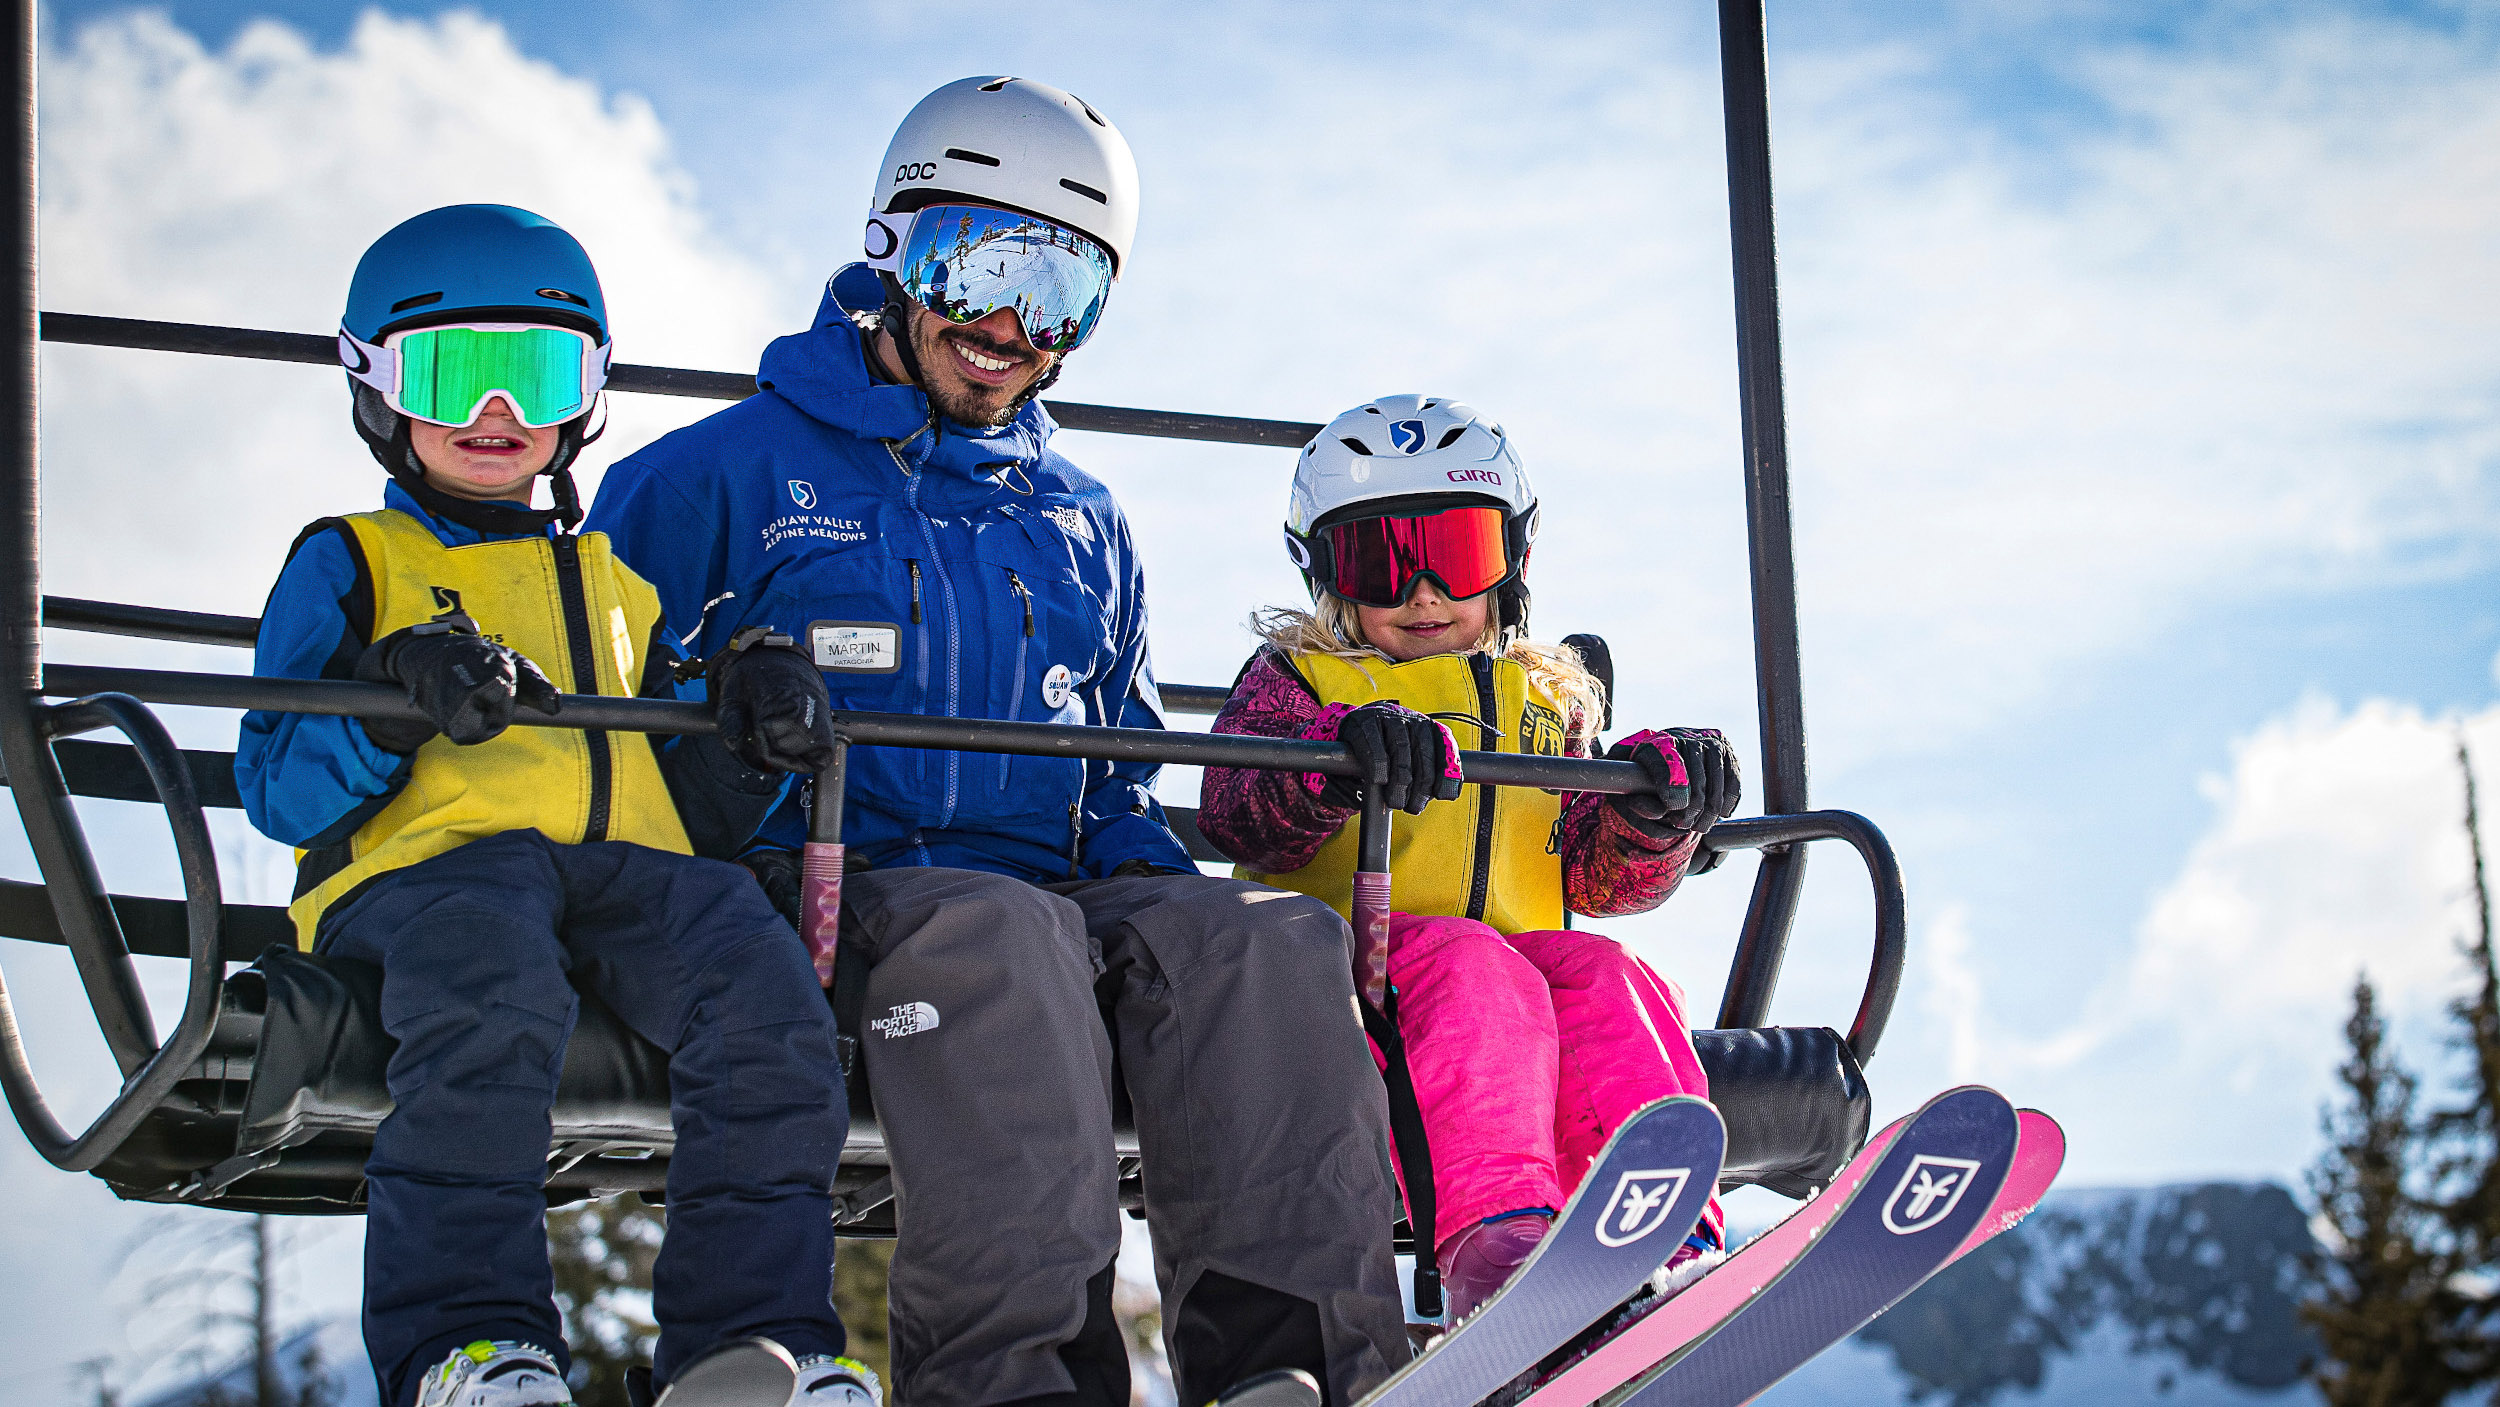 Kids ski school on chairlift with instructor